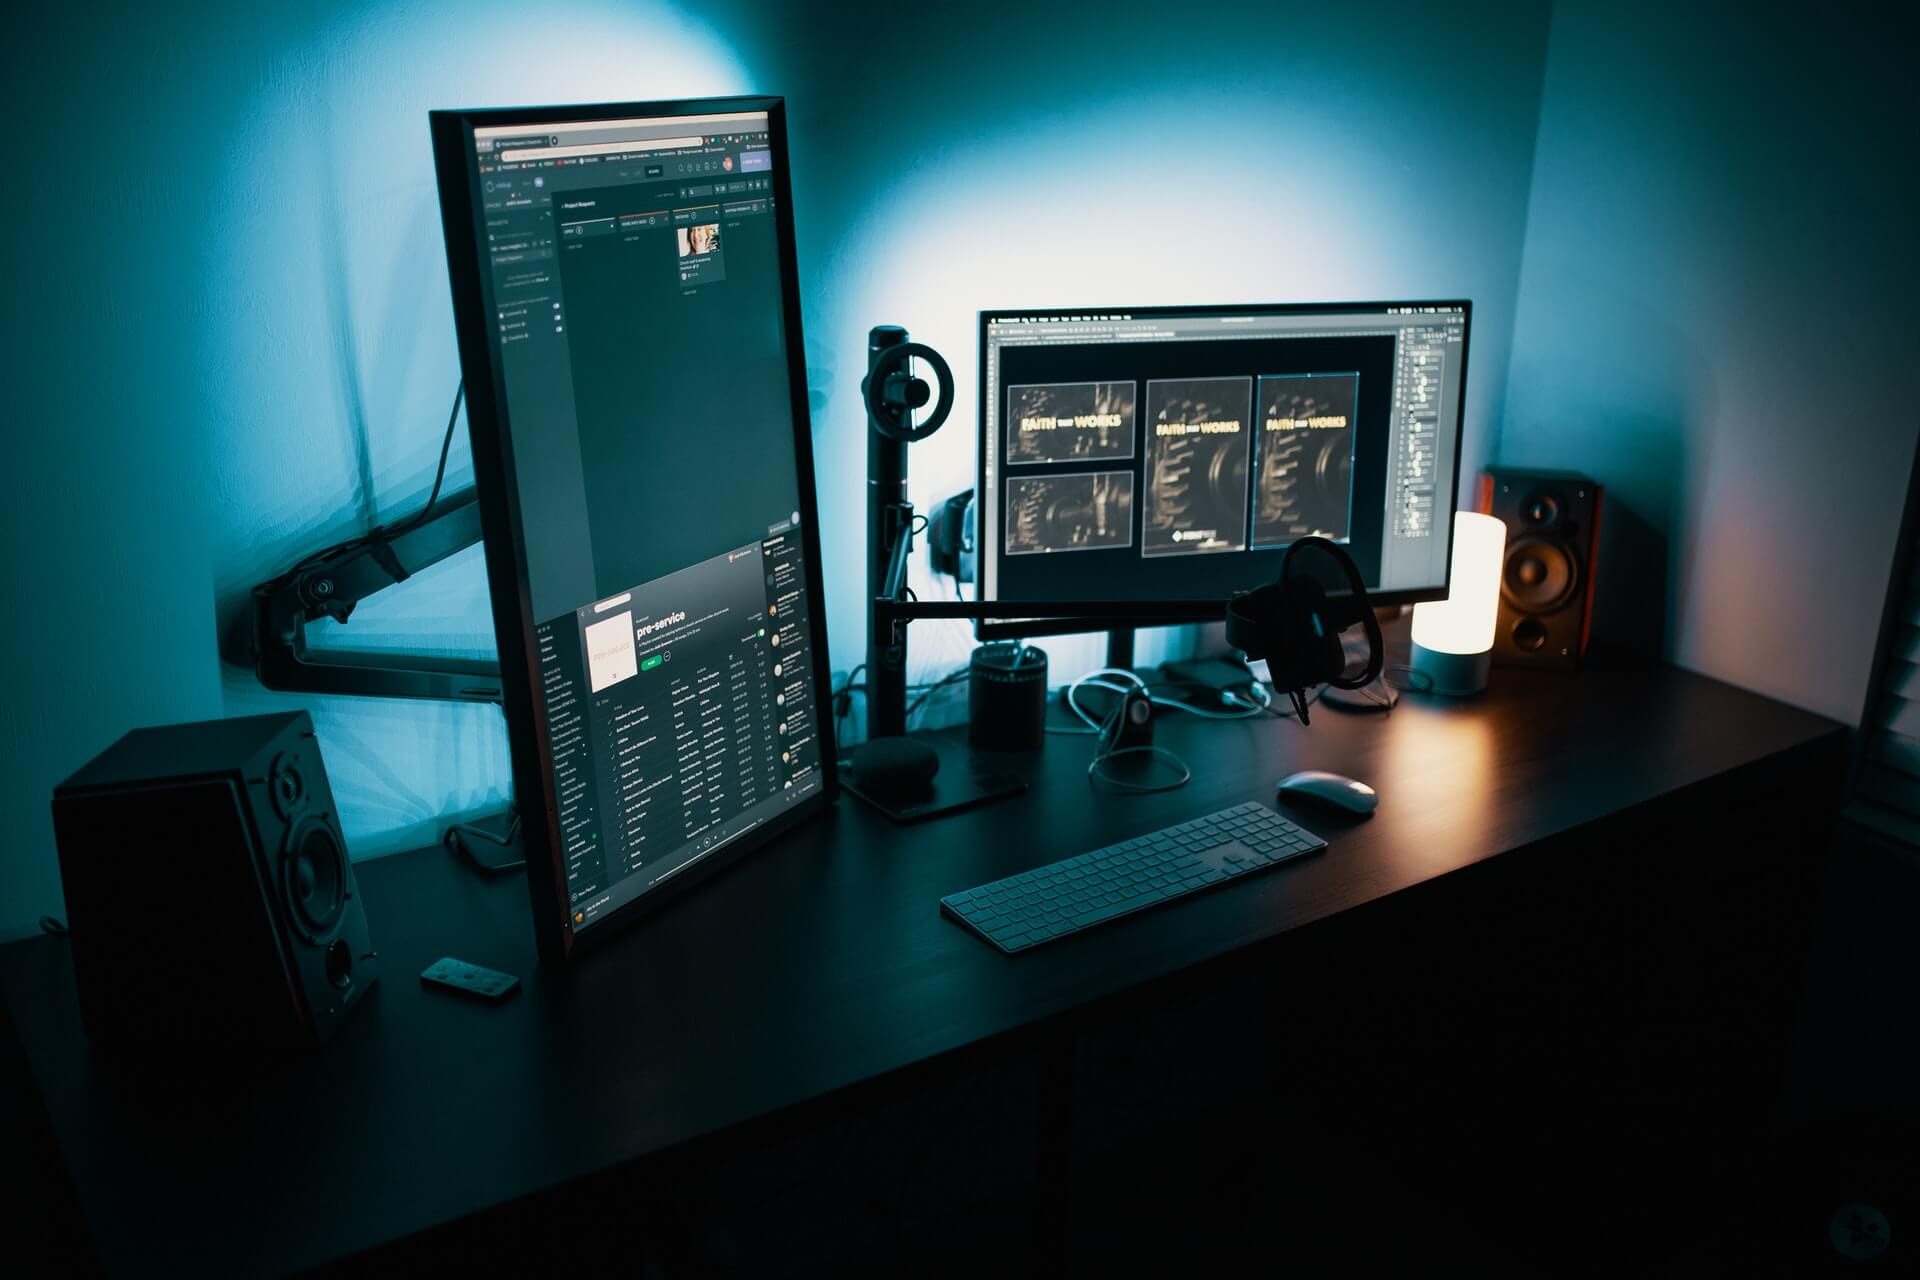 7 Best Chairs For Video Editing: Buyer's Guide (July 2022)